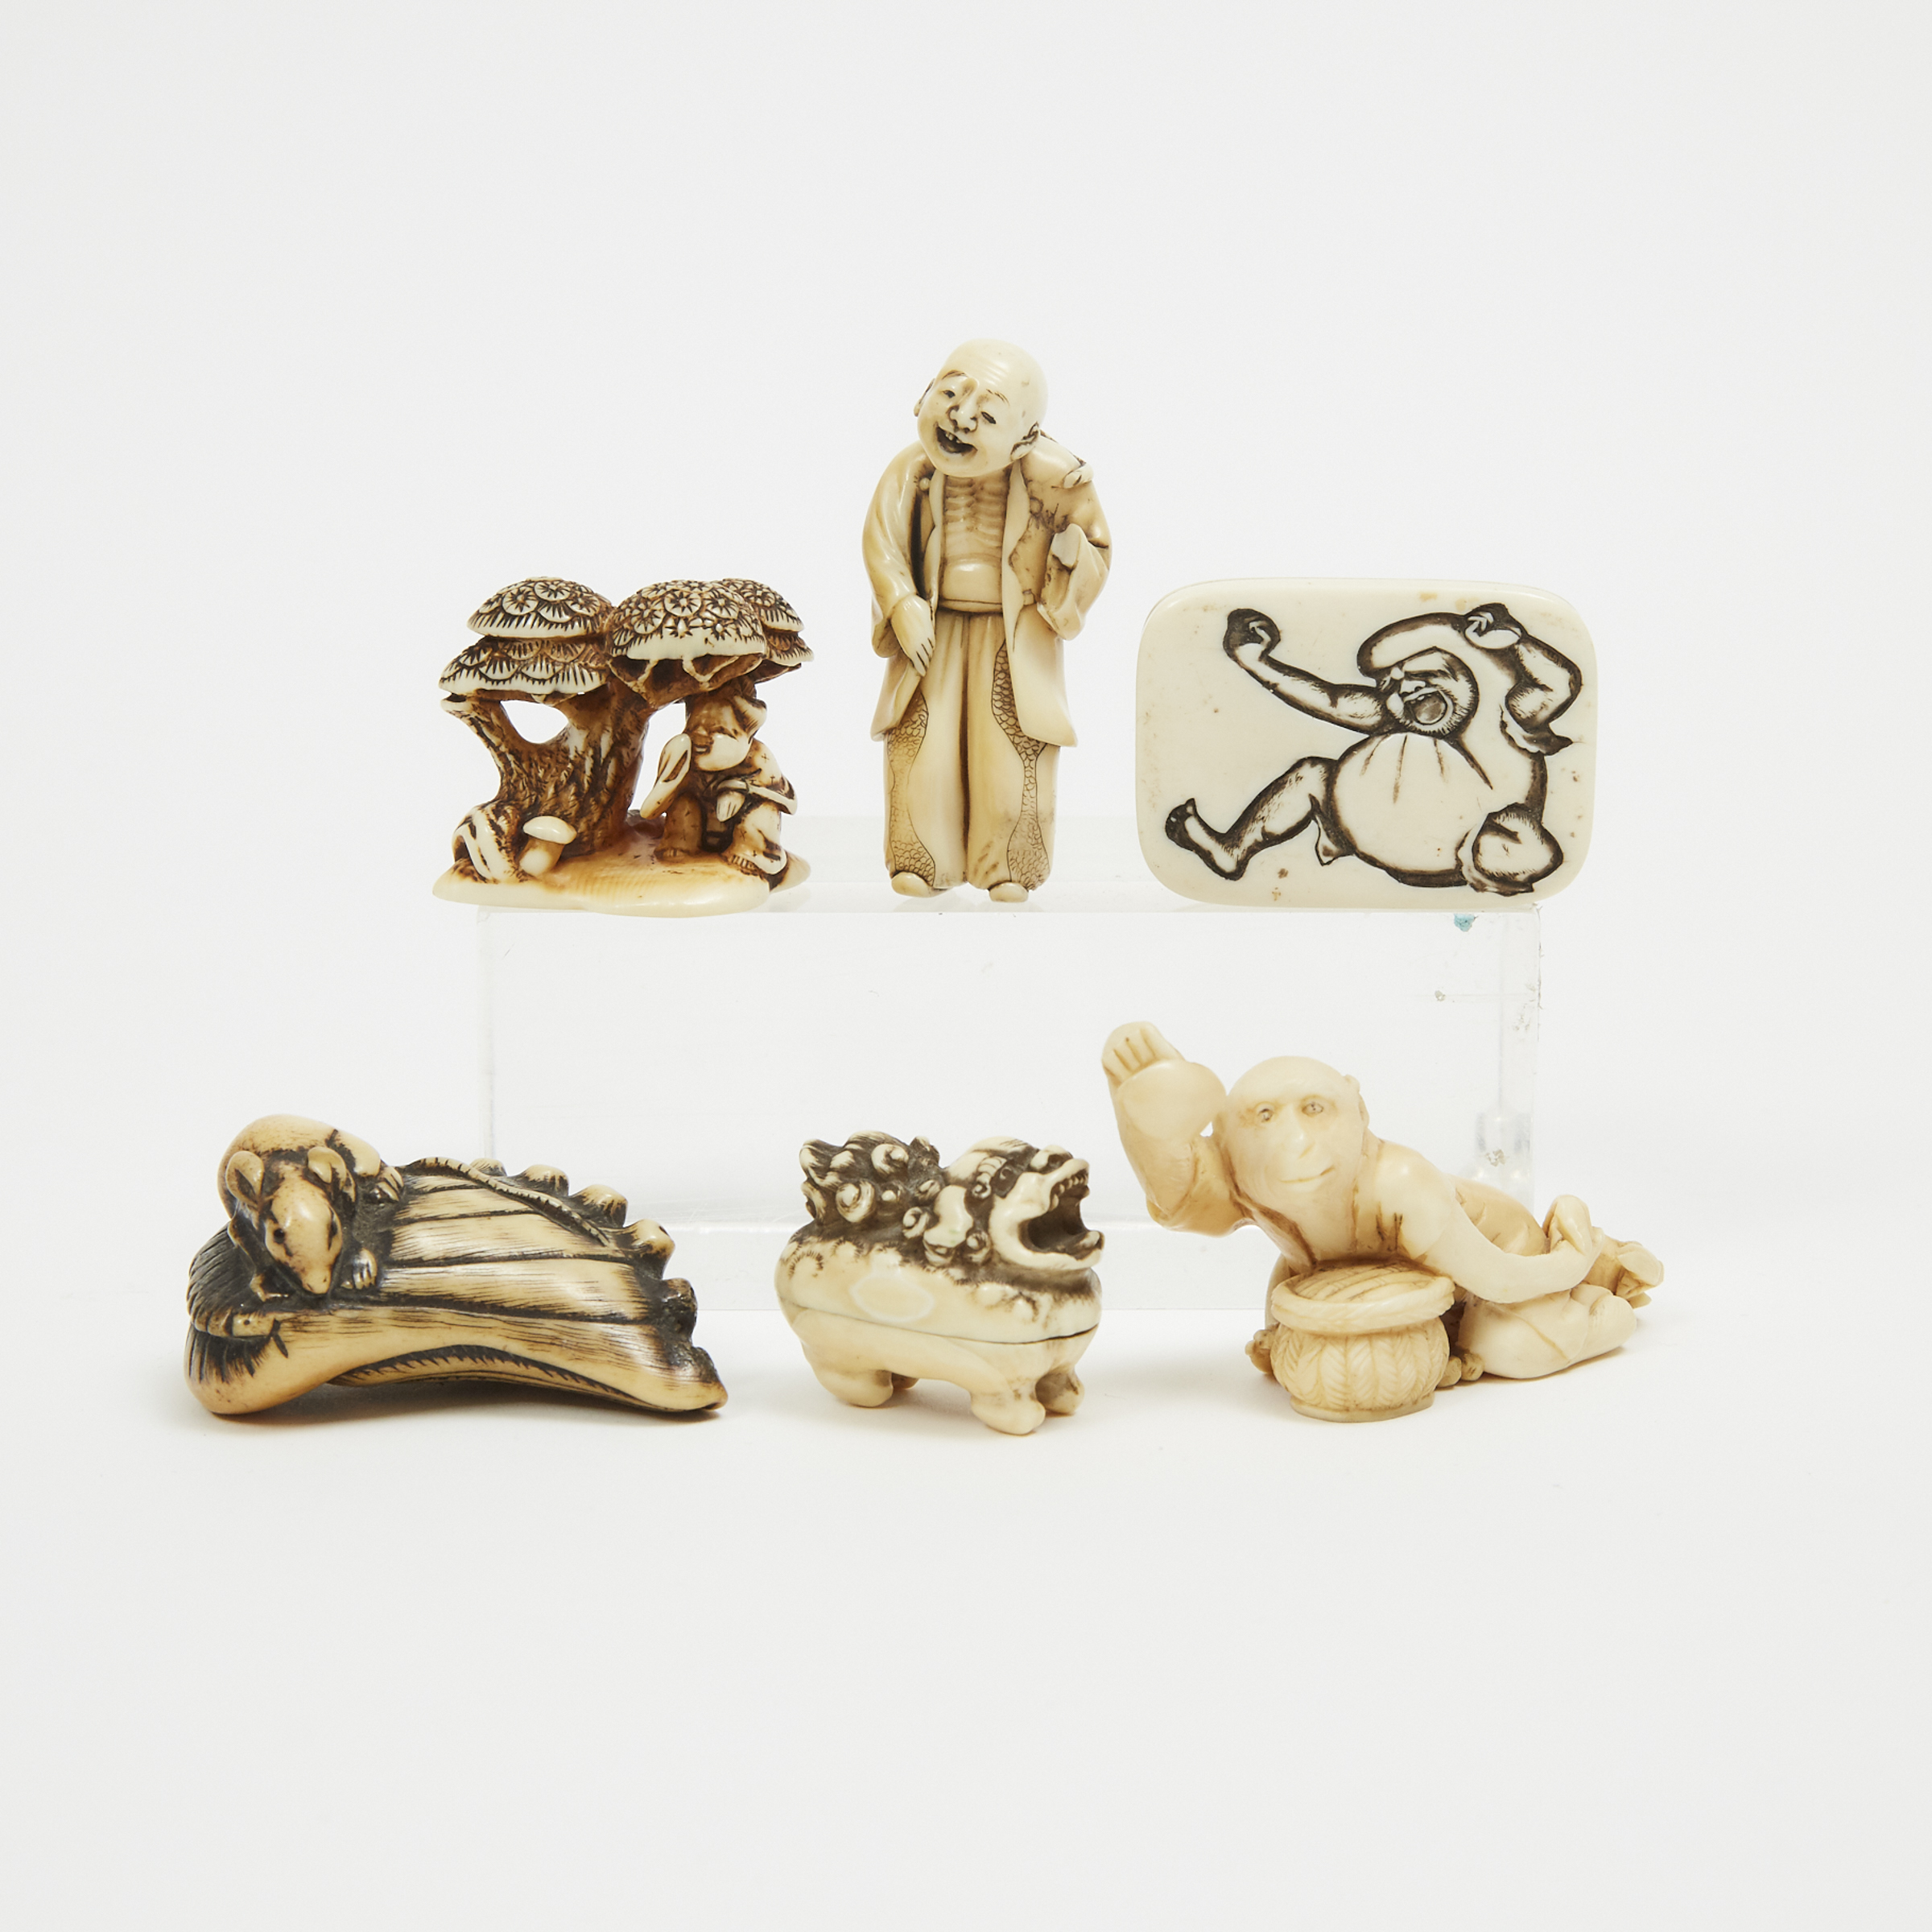 A Group of Six Ivory and Antler Netsuke, 19th/Early 20th Century